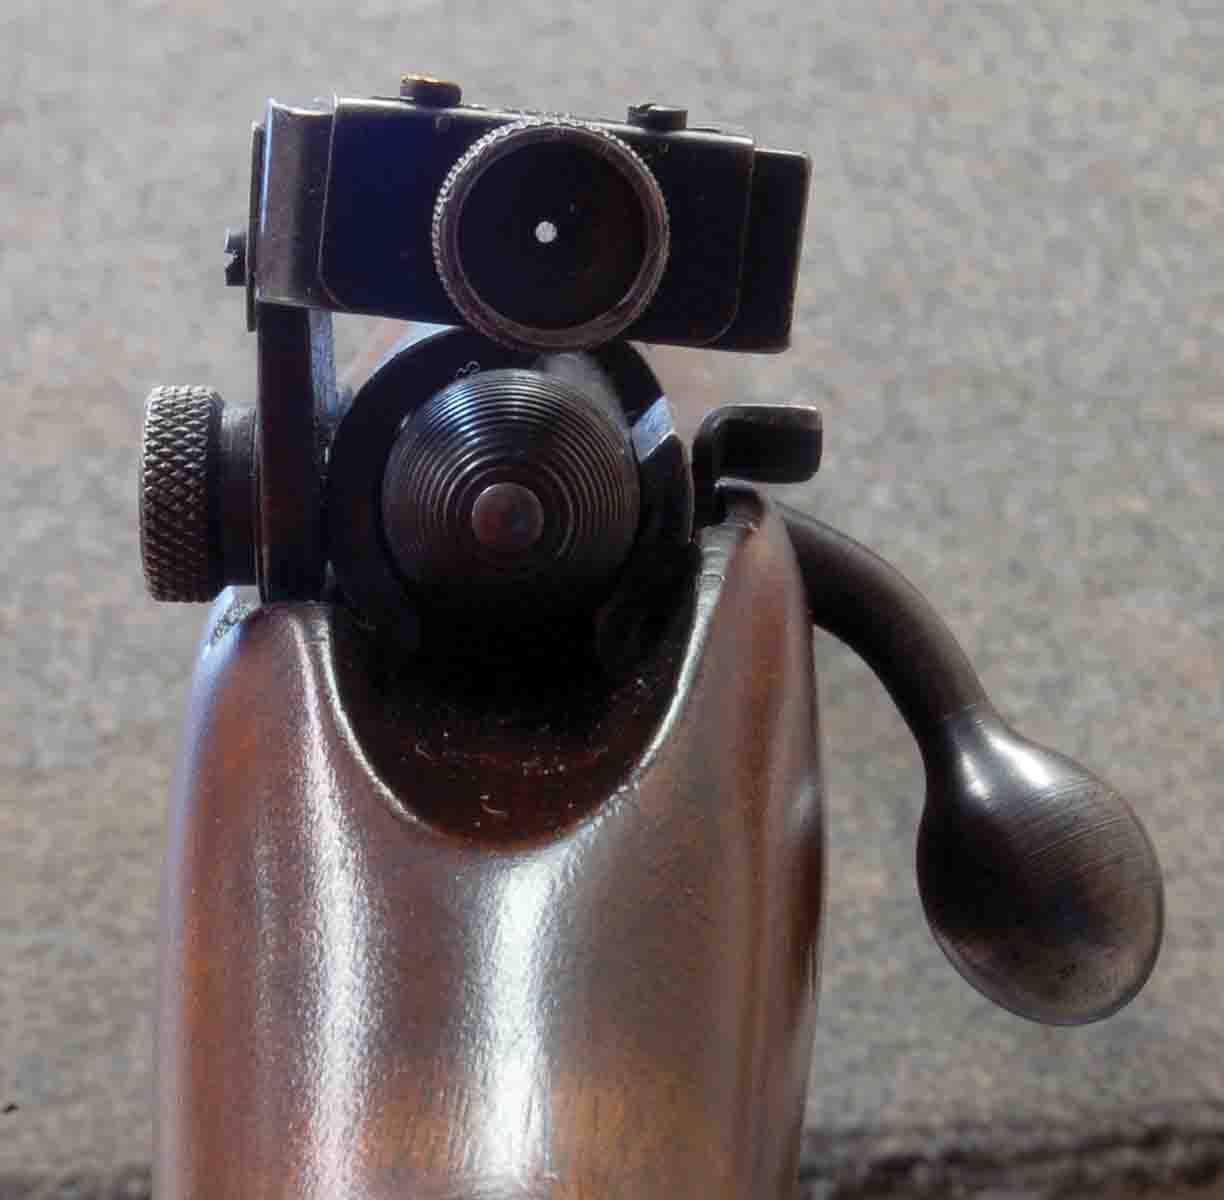 Another common problem is bent receiver sight arms on older .22 rimfires such as this Remington Model 510P.